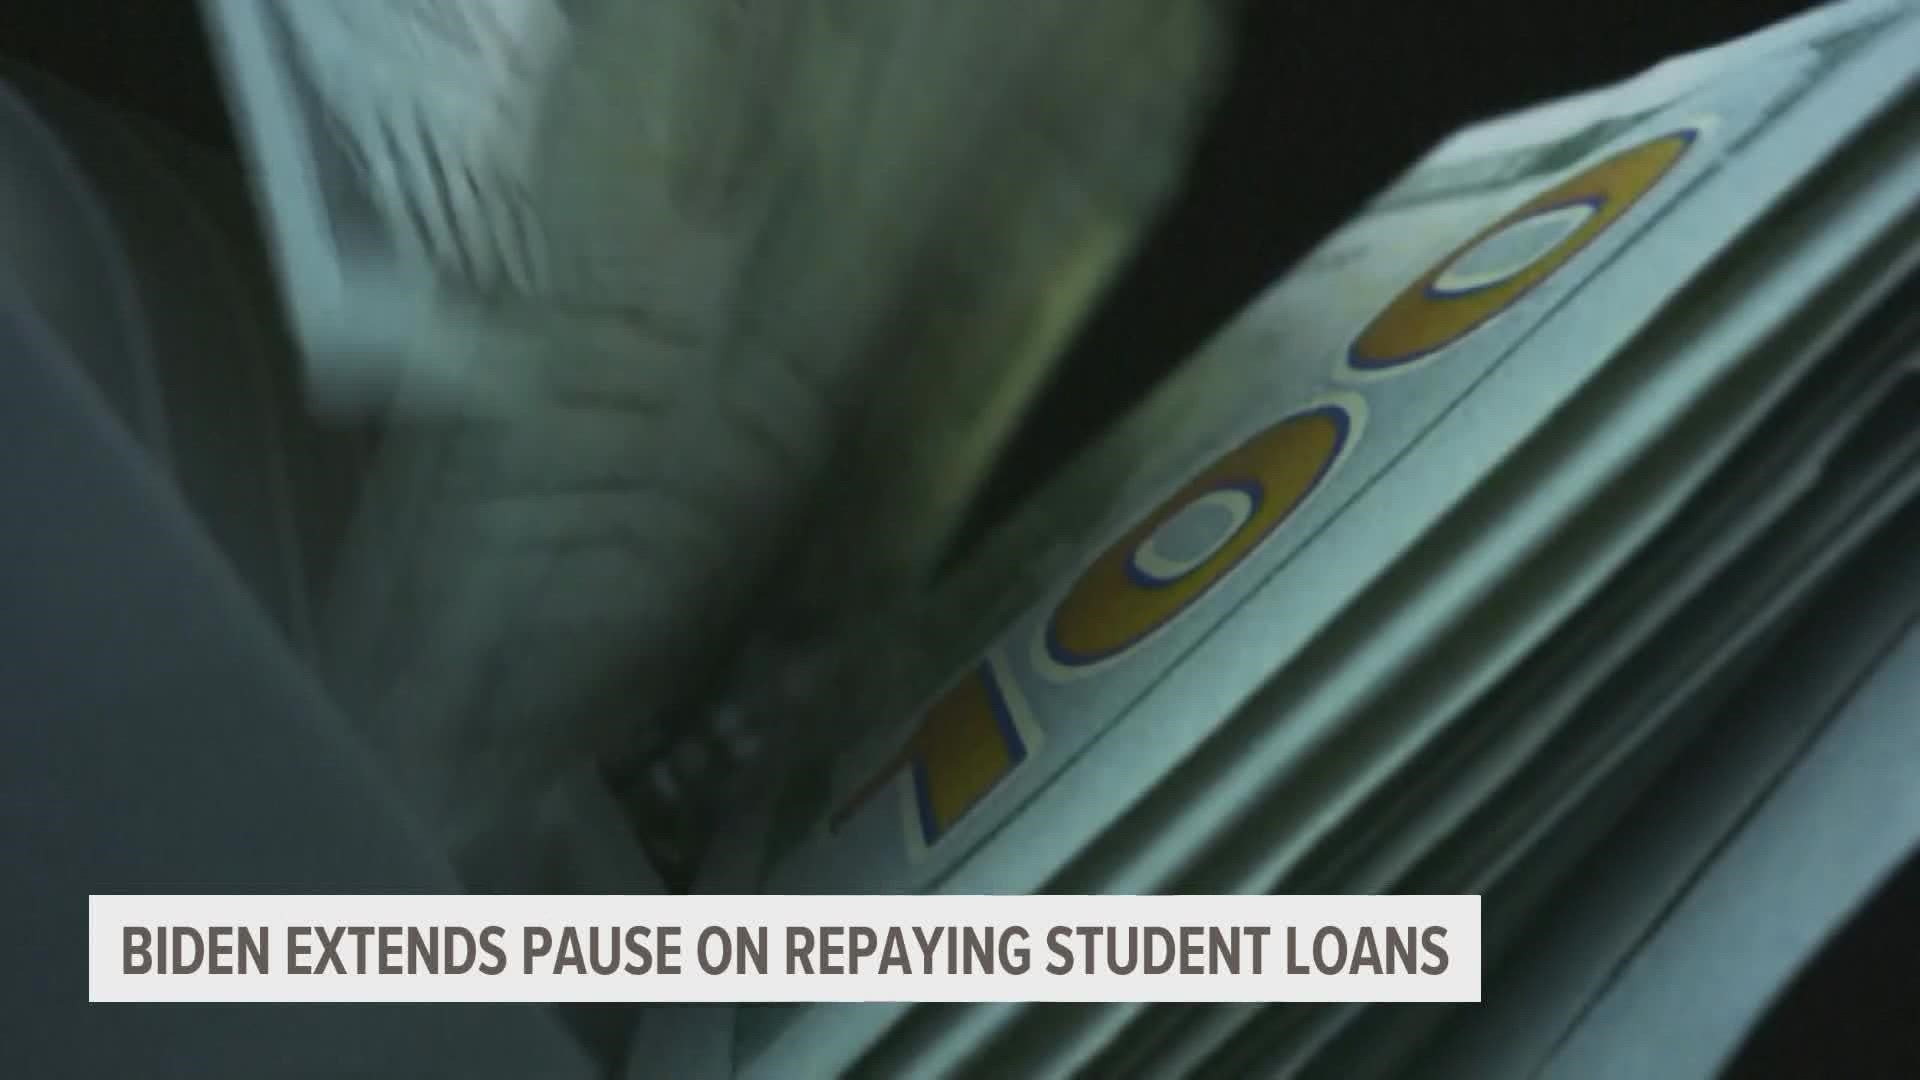 Local 5 spoke with financial experts and Iowa borrowers to help break down what's in the new student loan relief plan announced Wednesday.